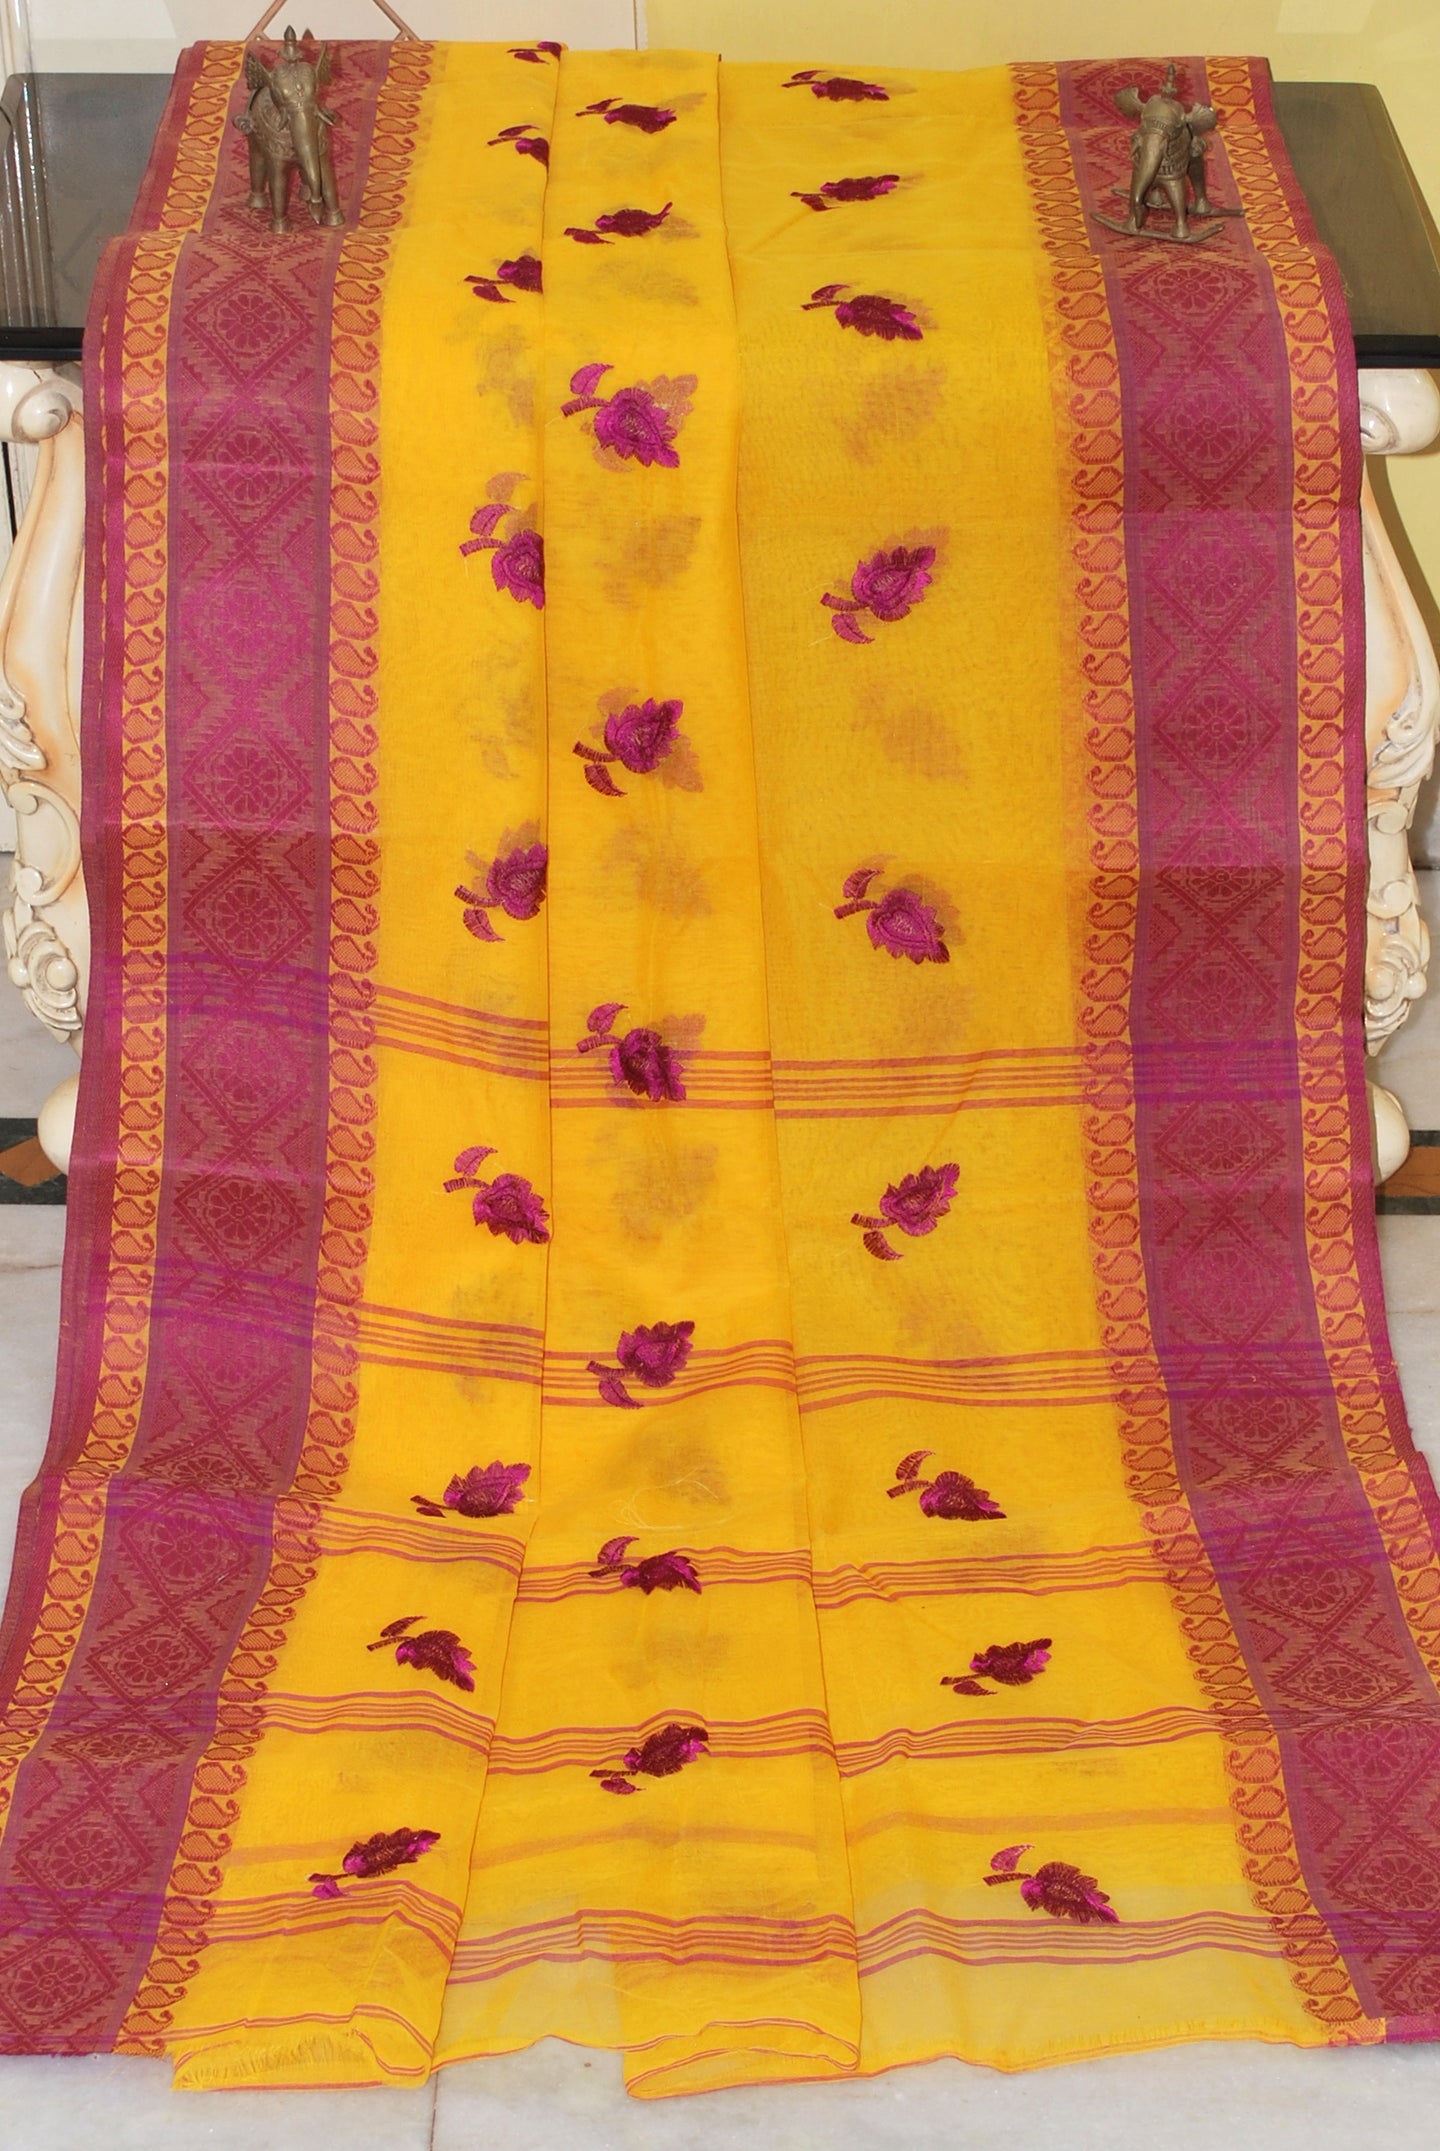 Bengal Handloom Cotton Saree with Leaf Motif Embroidery Work in Bright Yellow and Magenta